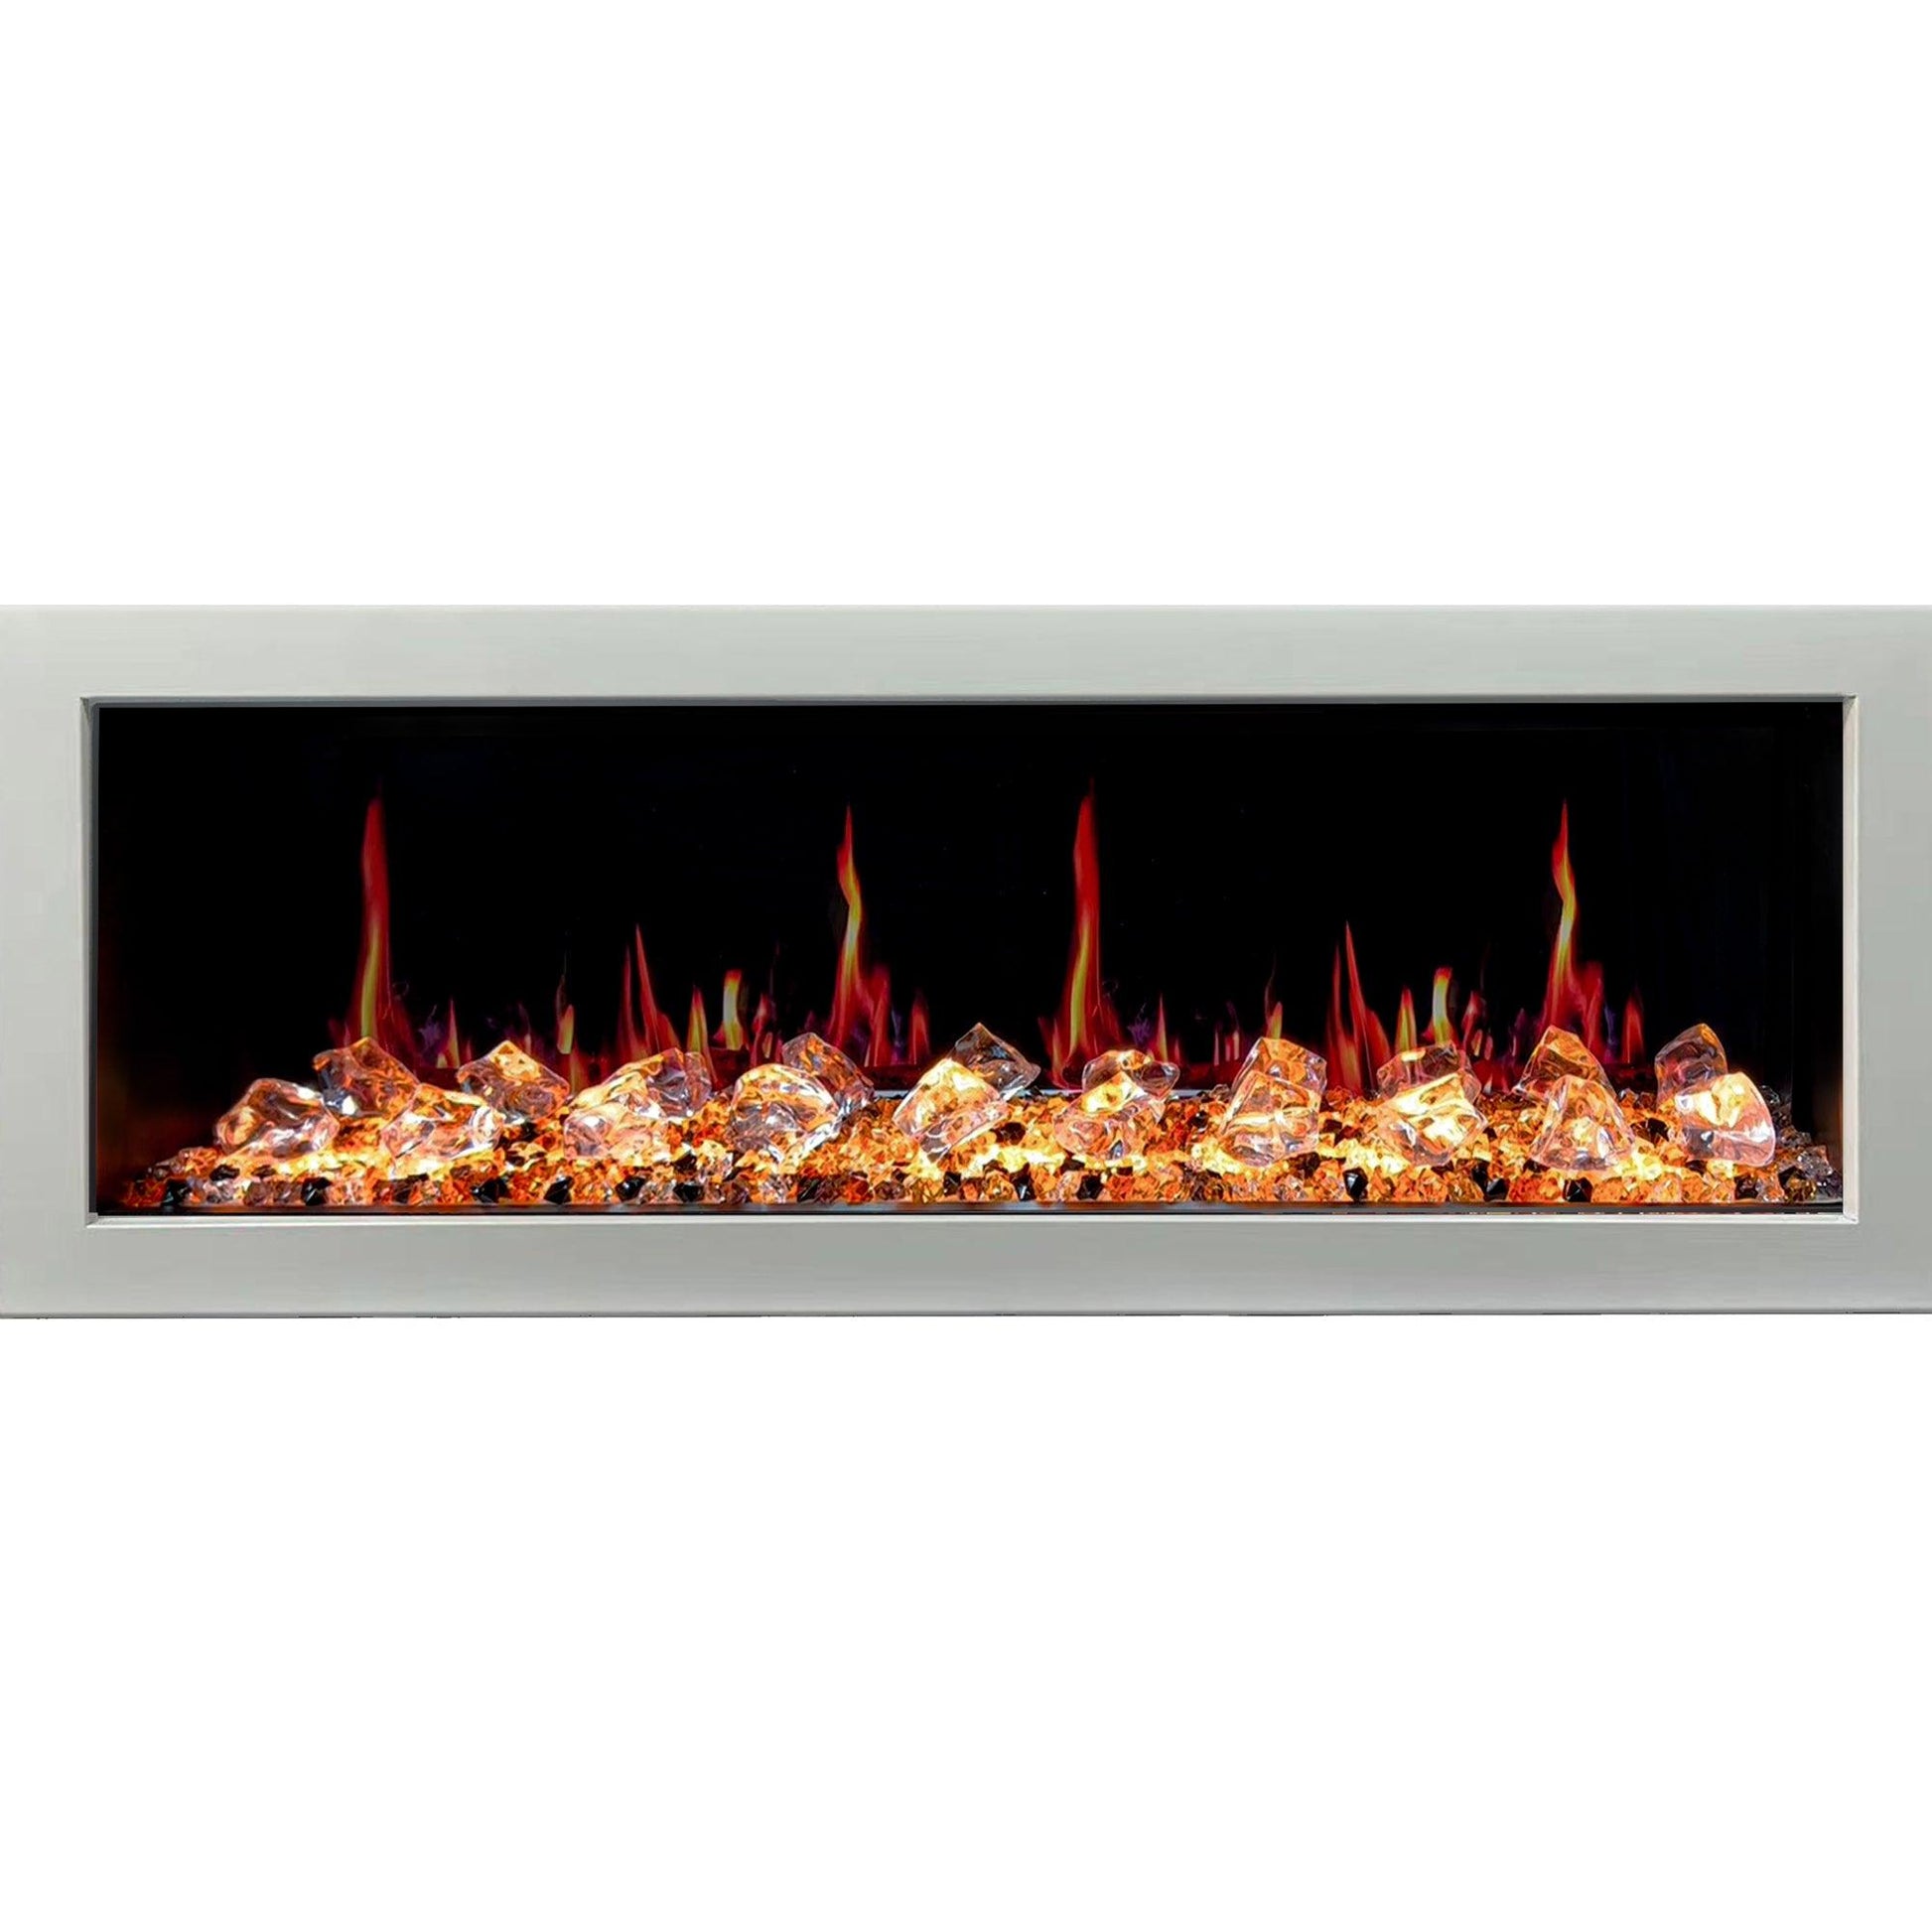 ZopaFlame™ 58" Linear Wall-mount Electric Fireplace - WC19588V - ZopaFlame Fireplaces